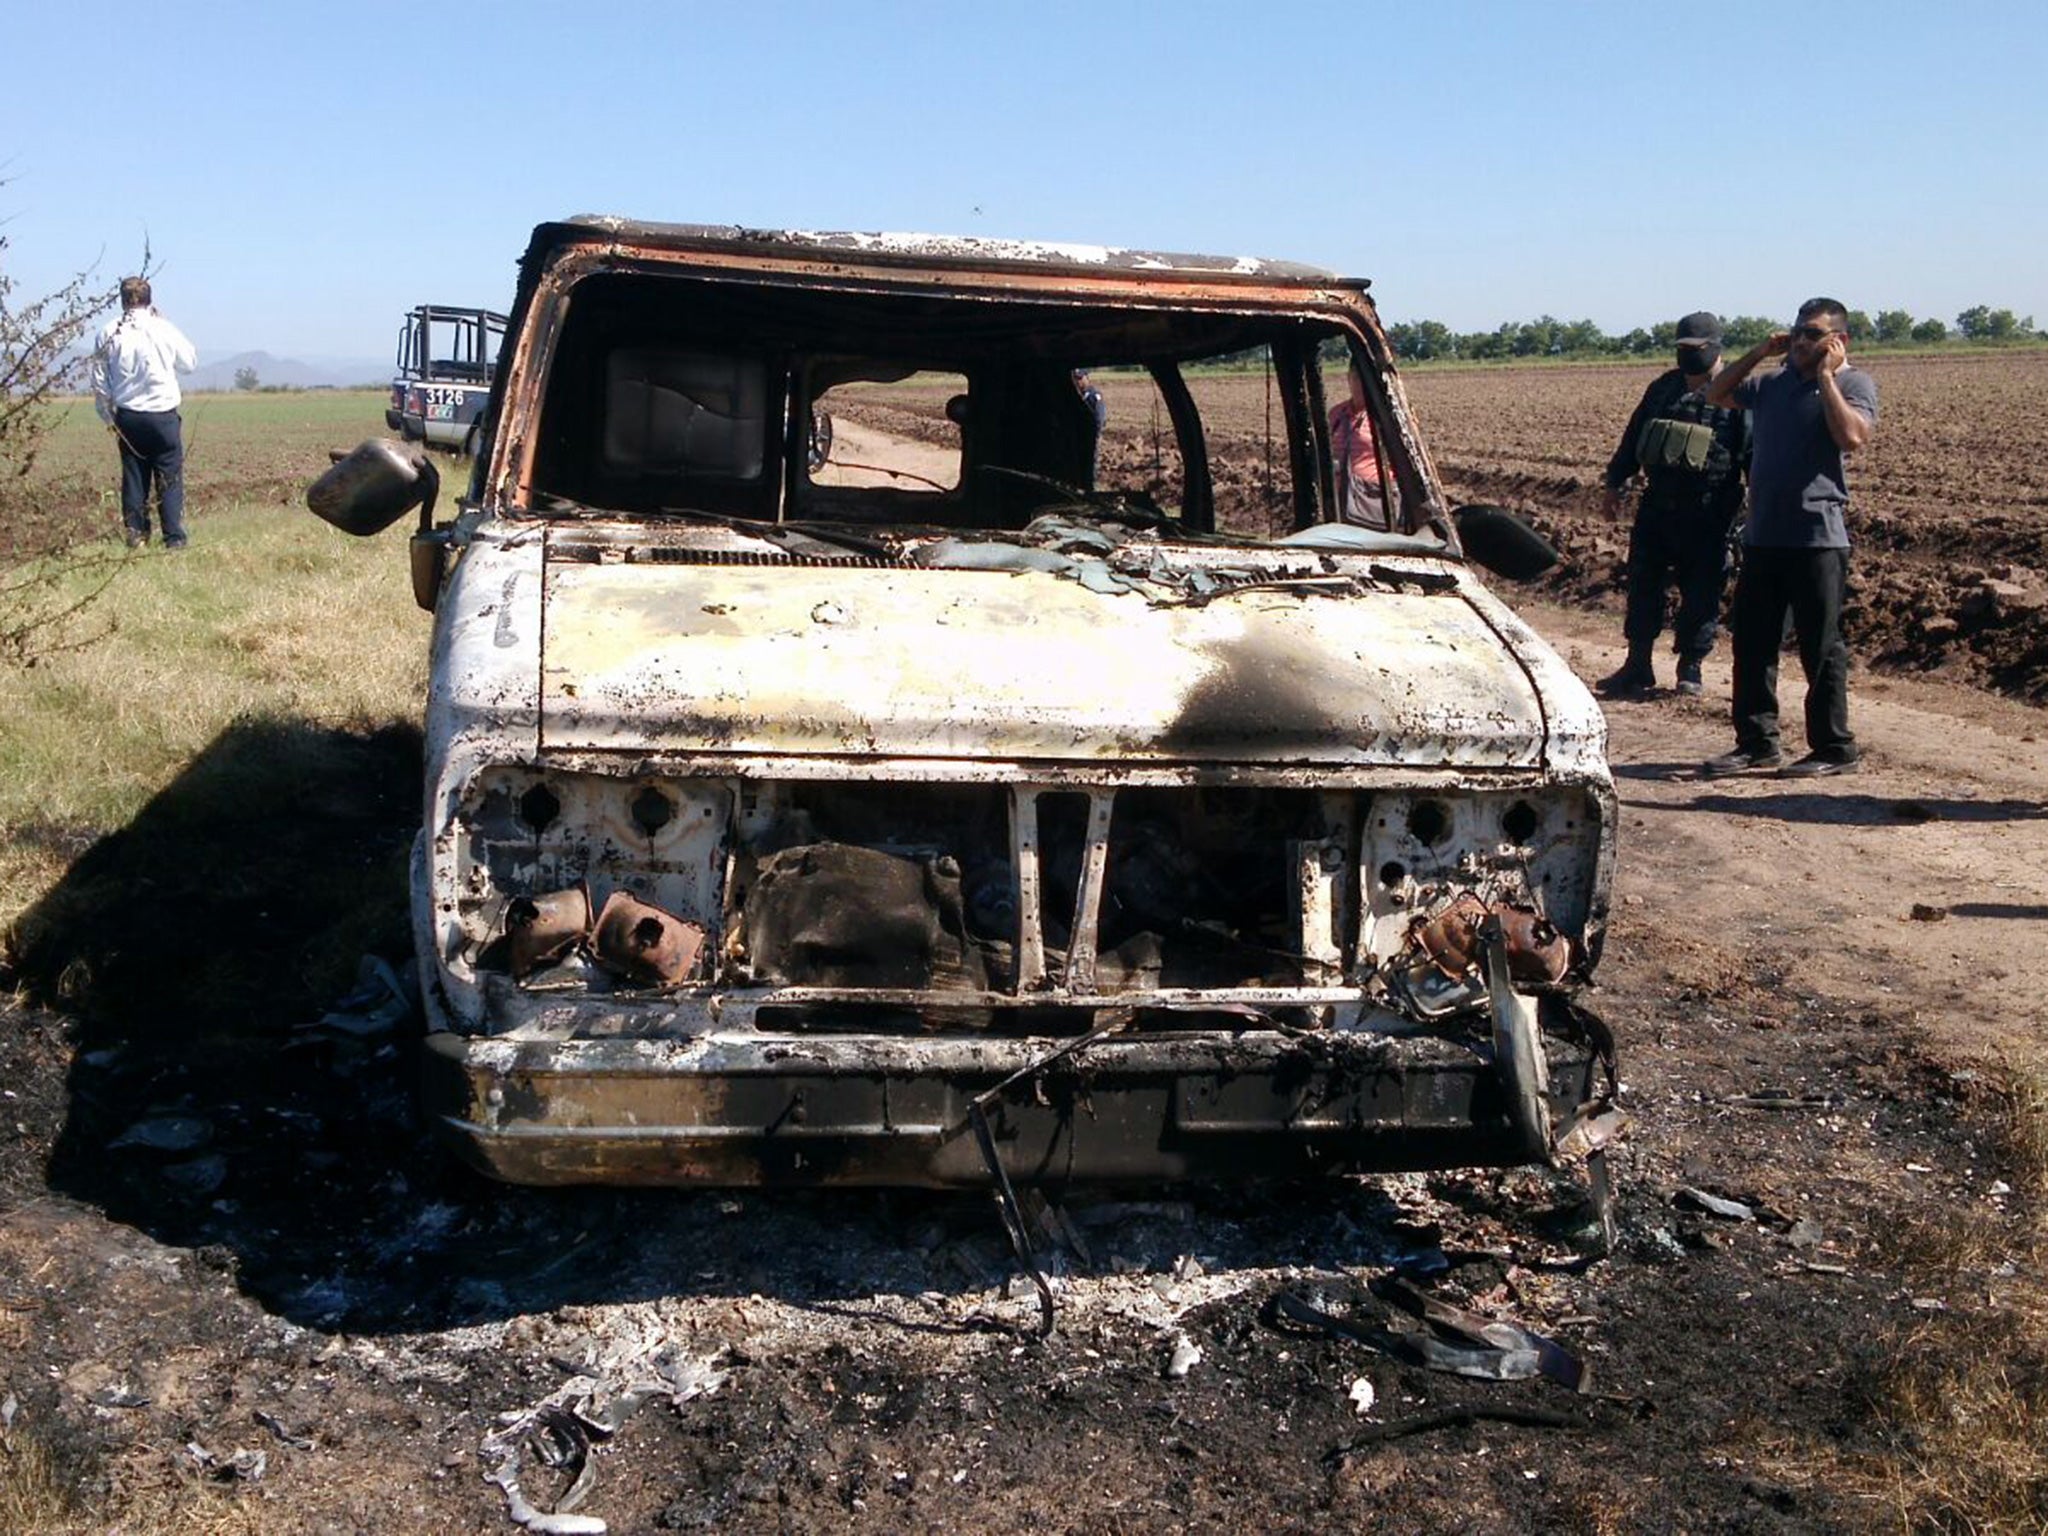 Mexican authorities inspect a burnt out van suspected to belong to a pair of Australian tourists missing for more than a week, in Sinaloa, Mexico